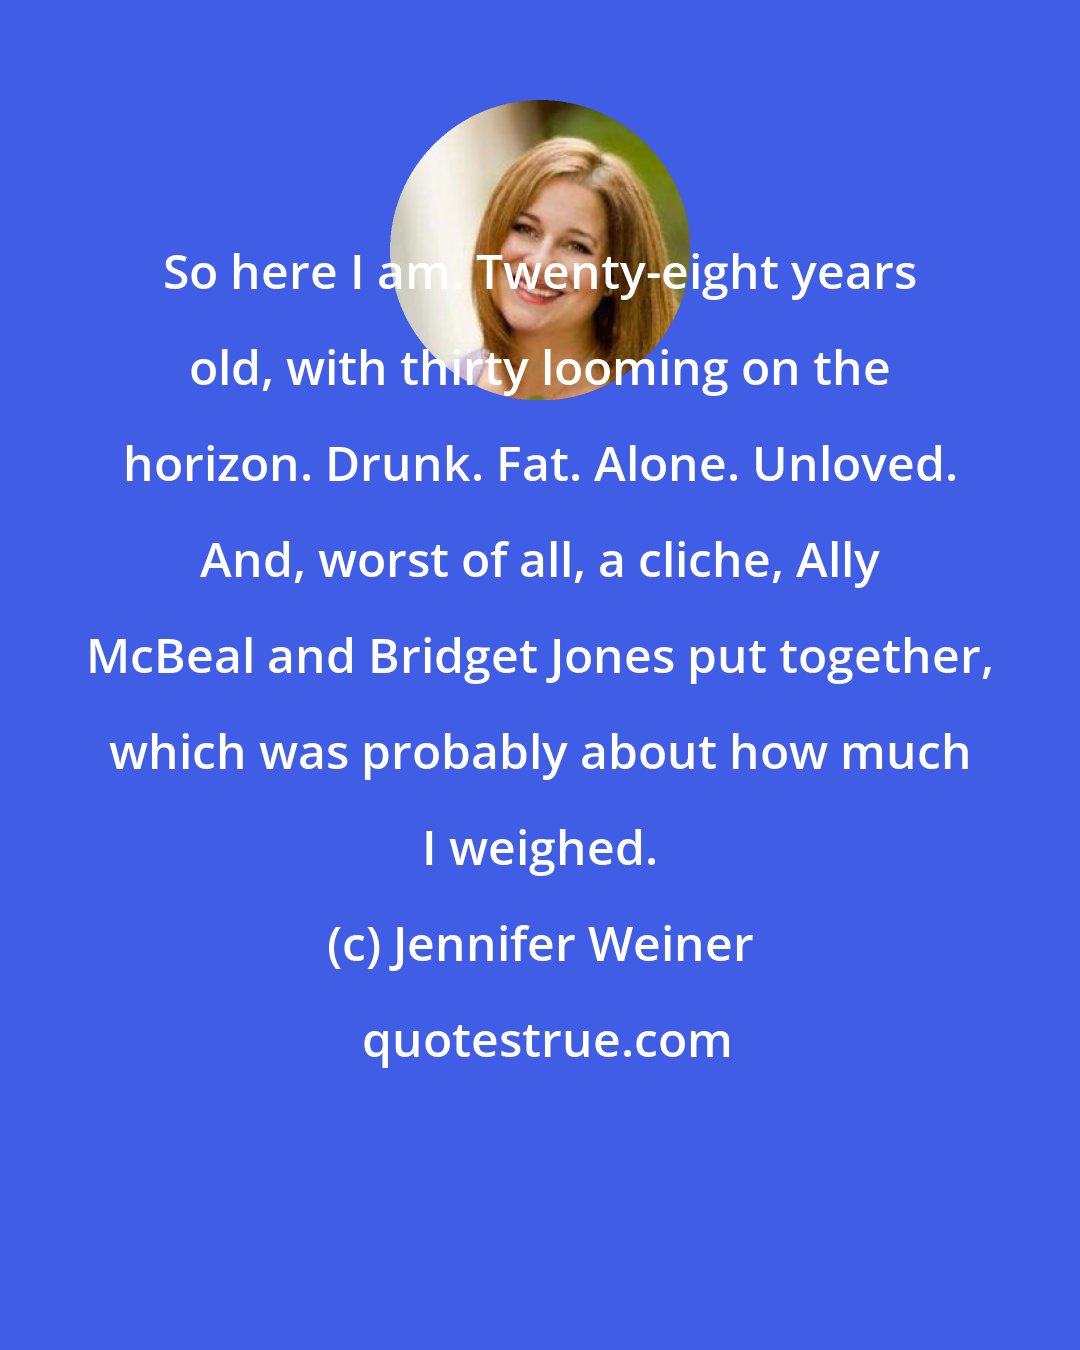 Jennifer Weiner: So here I am. Twenty-eight years old, with thirty looming on the horizon. Drunk. Fat. Alone. Unloved. And, worst of all, a cliche, Ally McBeal and Bridget Jones put together, which was probably about how much I weighed.